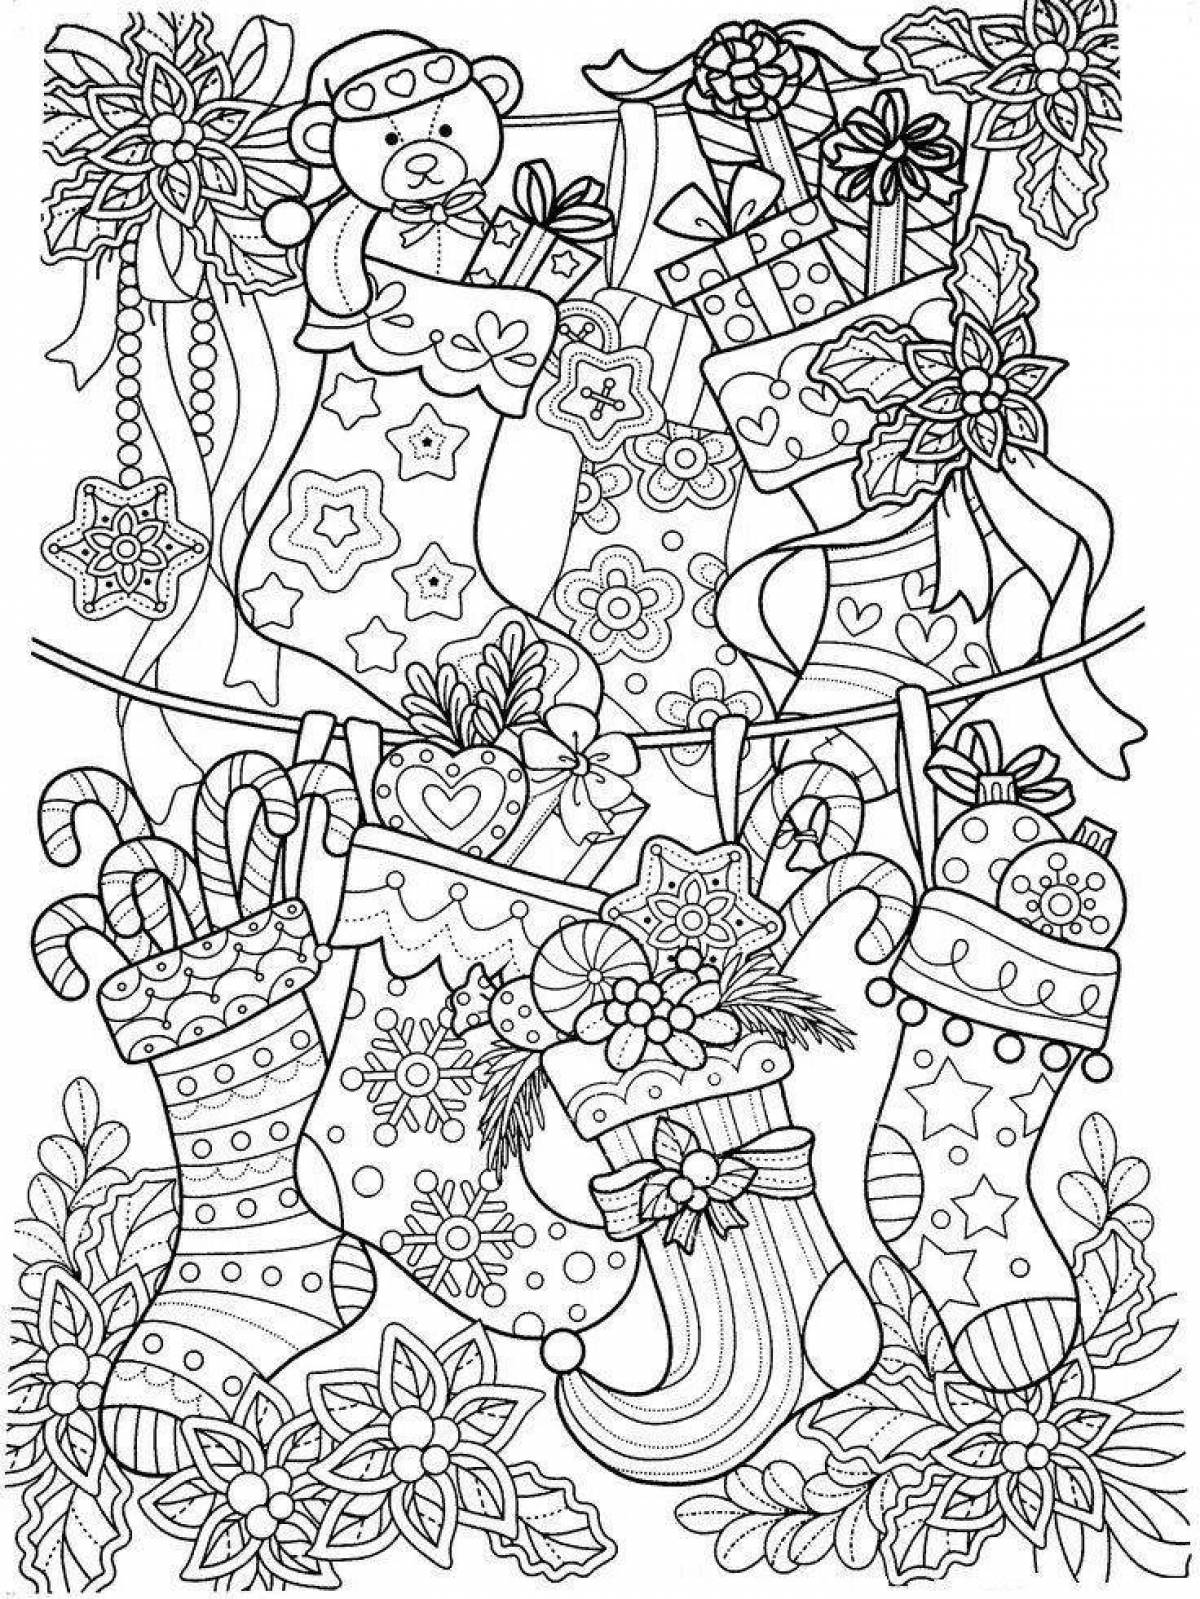 Amazing Christmas anti-stress coloring book